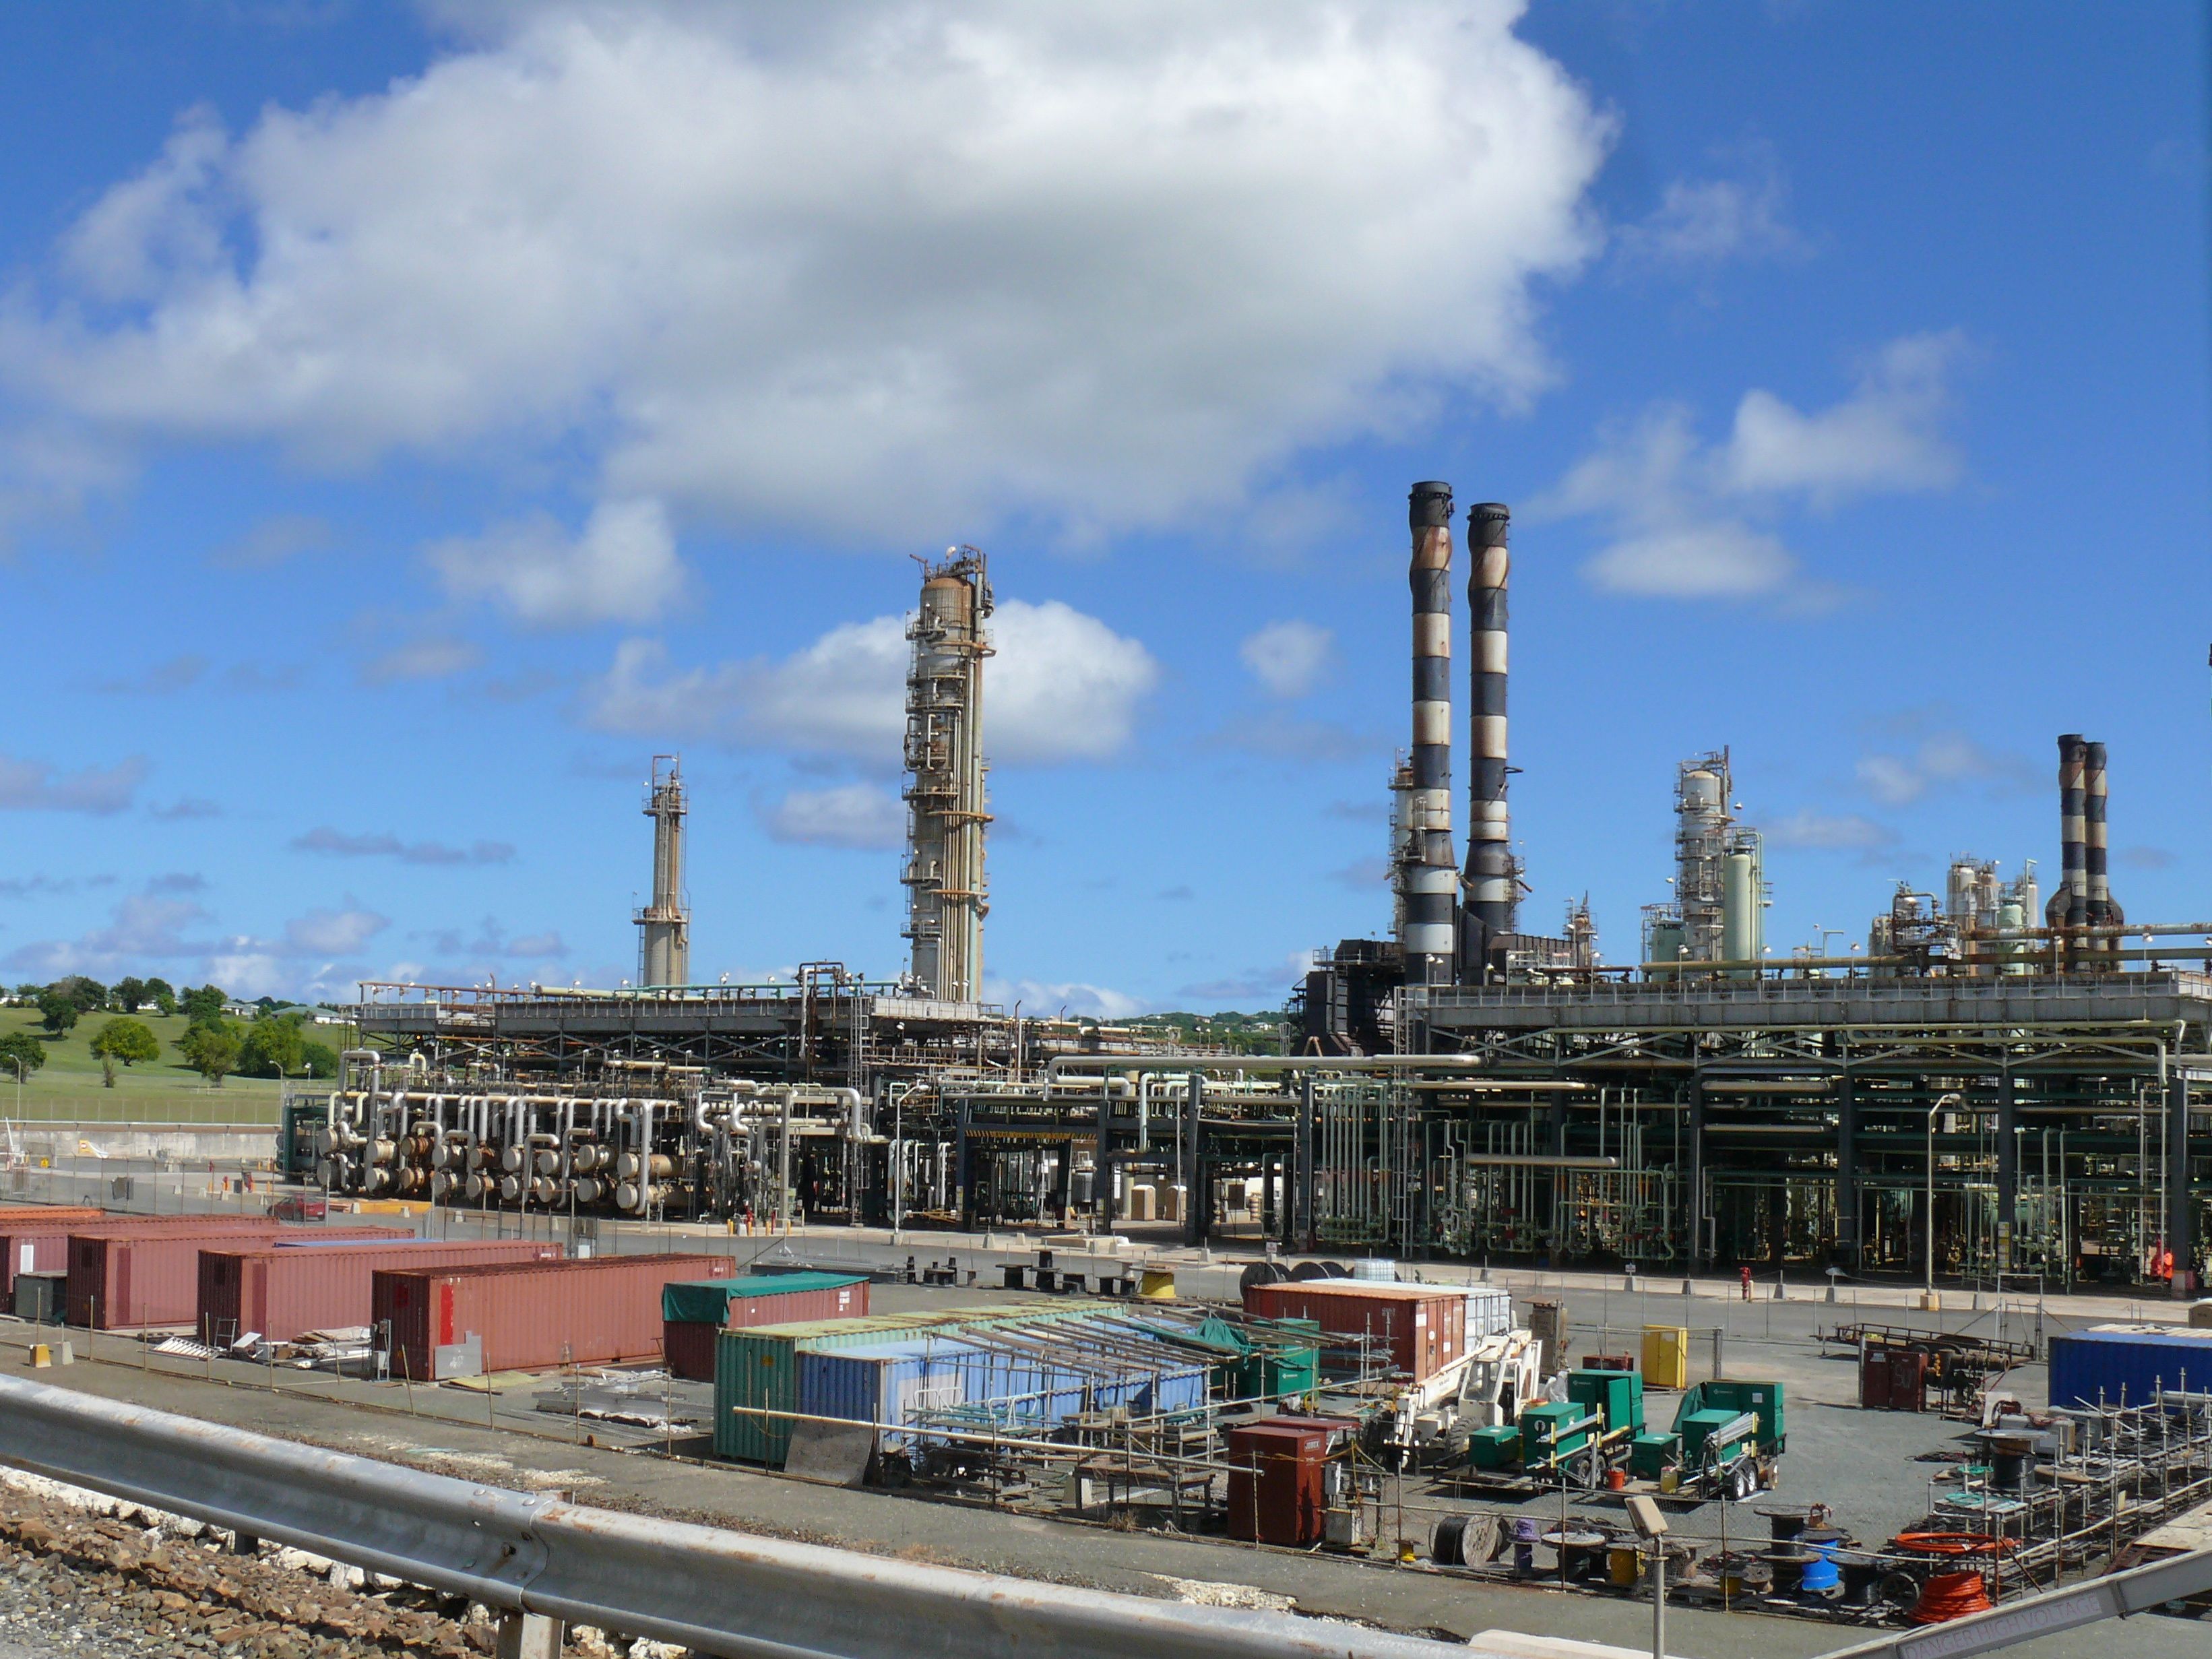 ArcLight Capital Partners Plans on Making Big Money With St. Croix Refinery